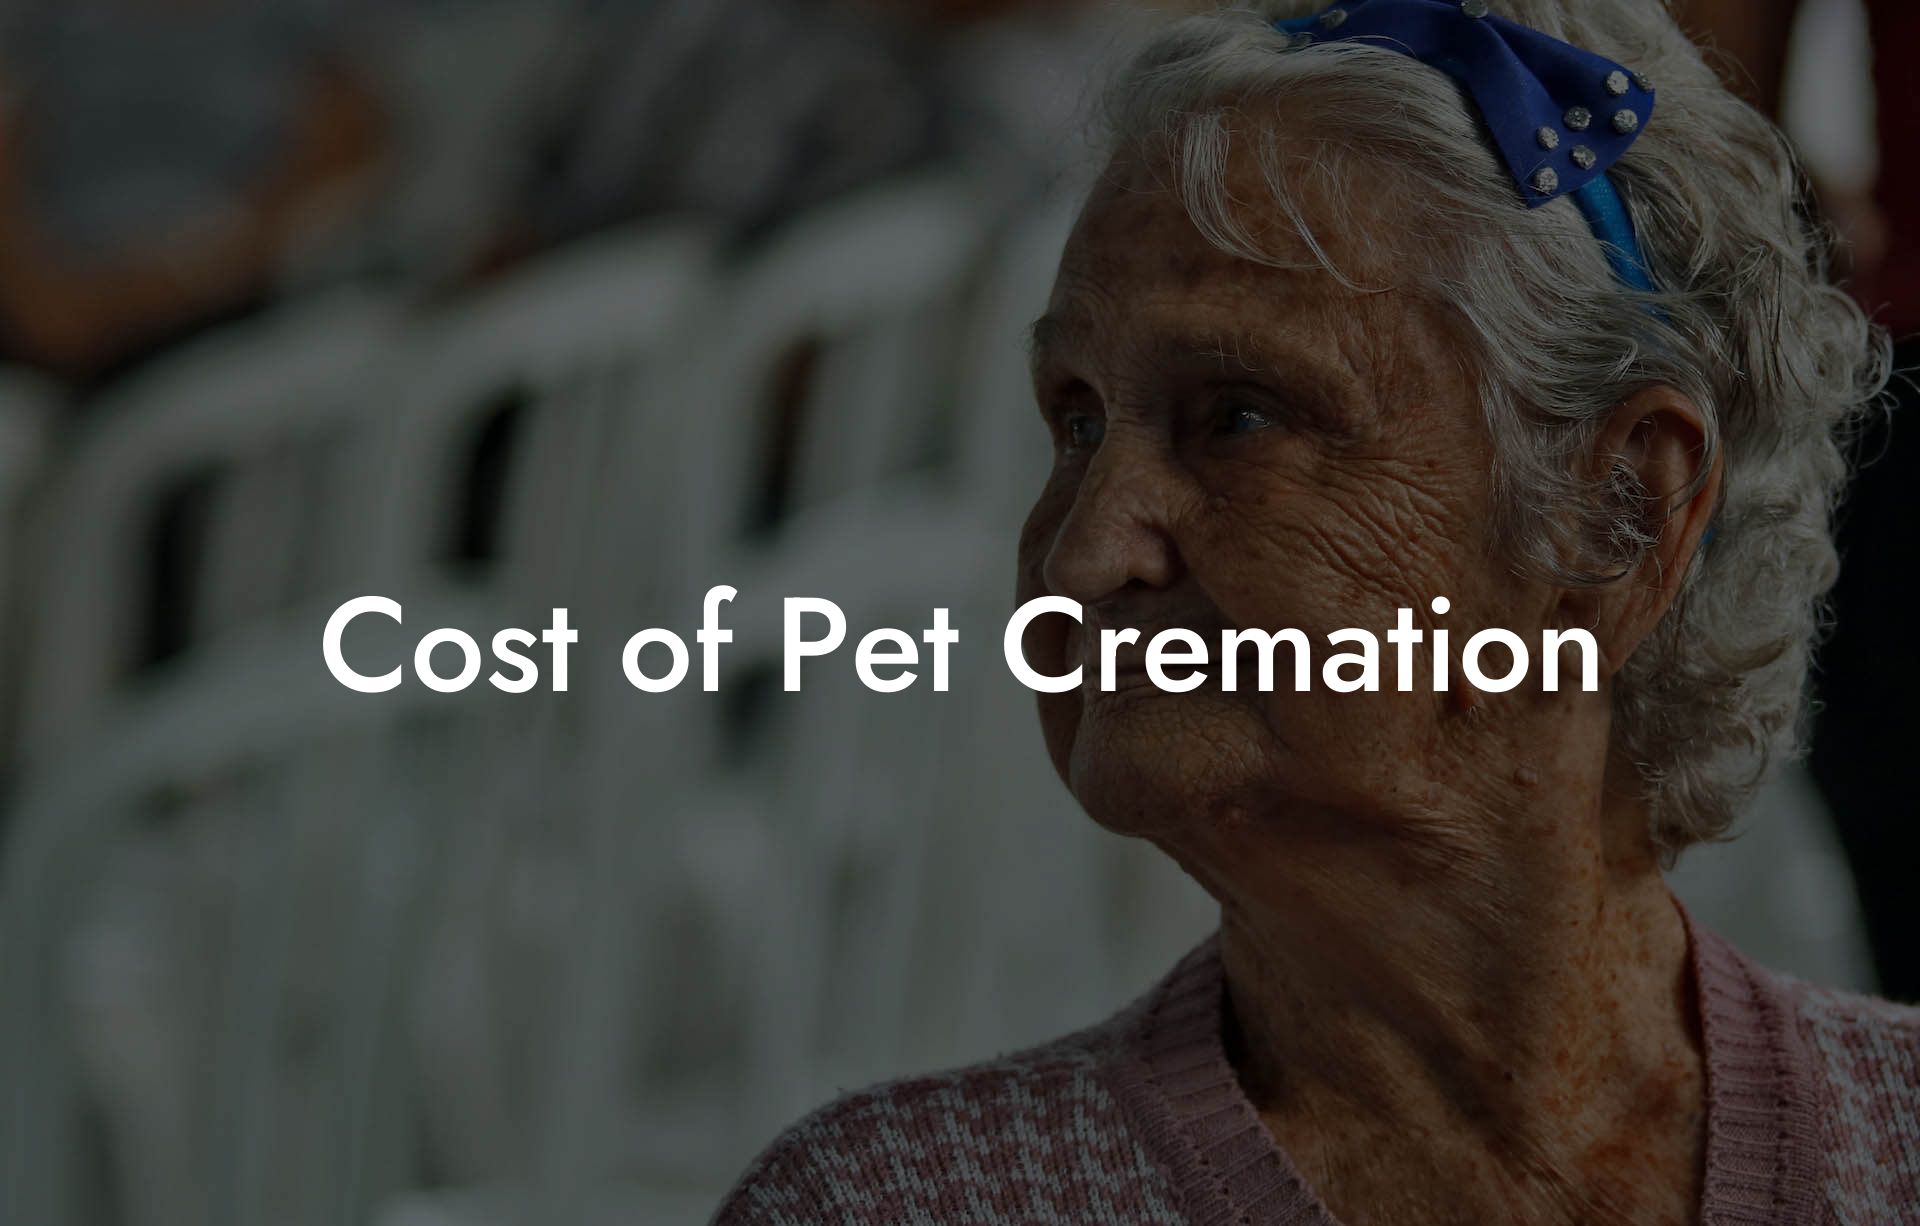 Cost of Pet Cremation